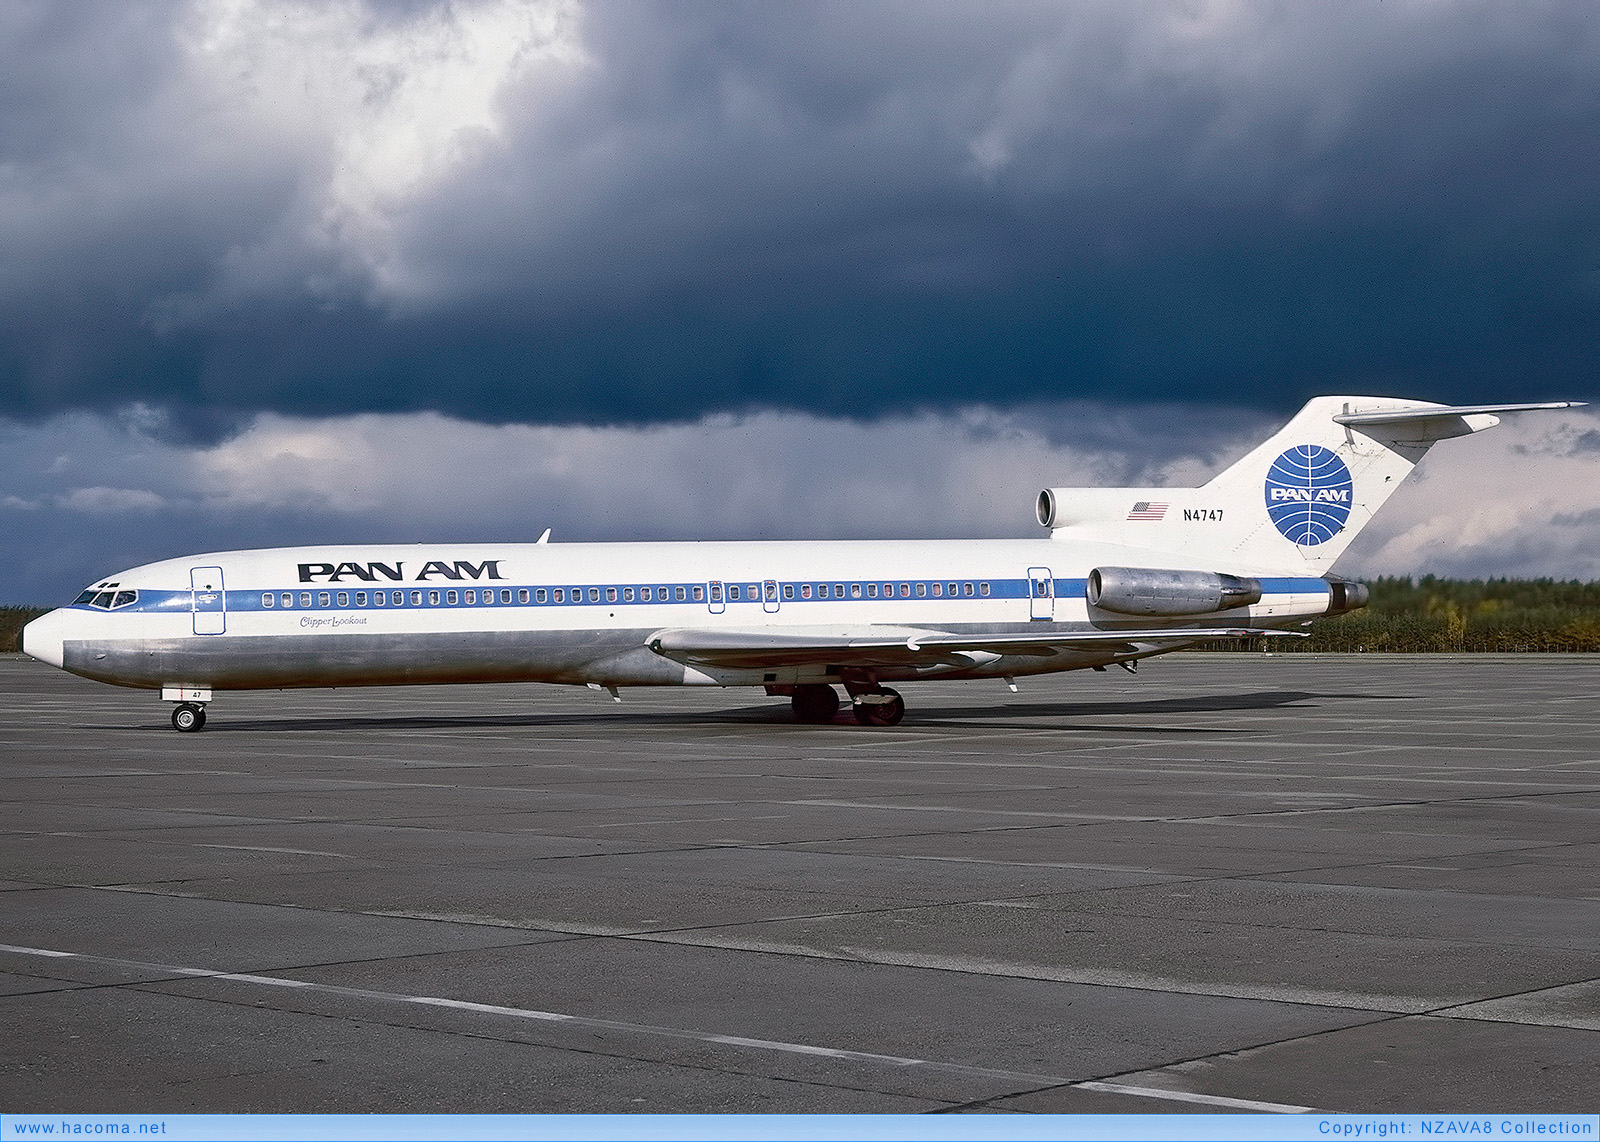 Photo of N4747 - Pan Am Clipper Lookout - Nuremberg Airport - Oct 1986